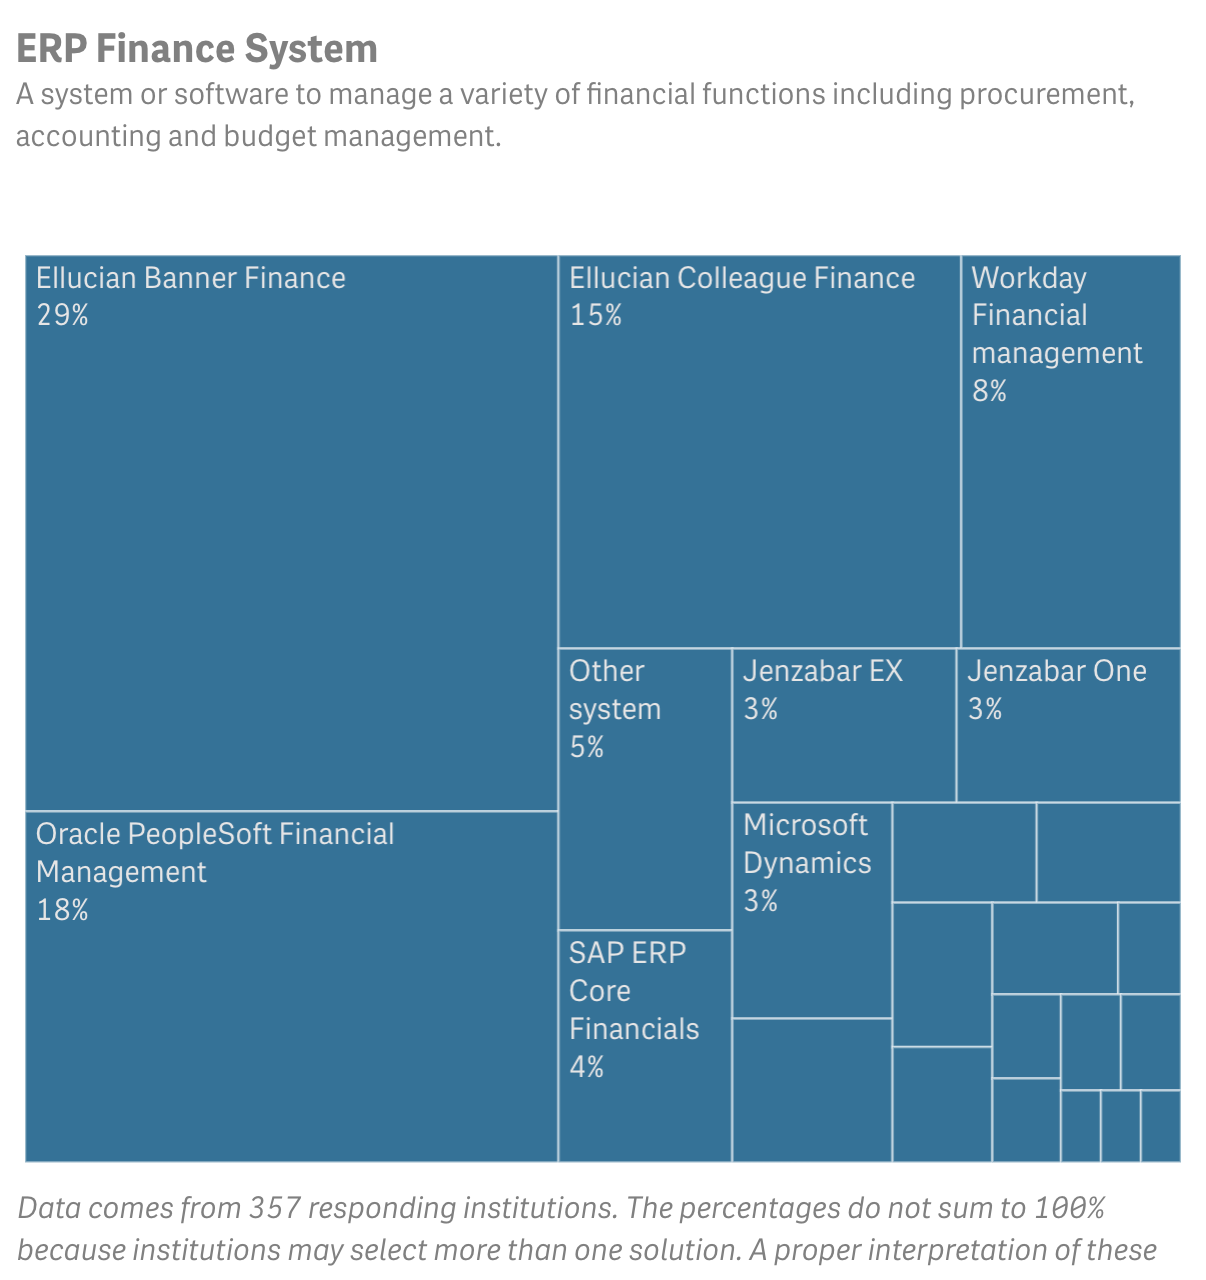 Title: ERP Finance System | A system or software to manage a variety of financial functions including procurement, accounting and budget management. Box divided into smaller boxes sized by percentage of total, showing the percentage of respondents using each system.